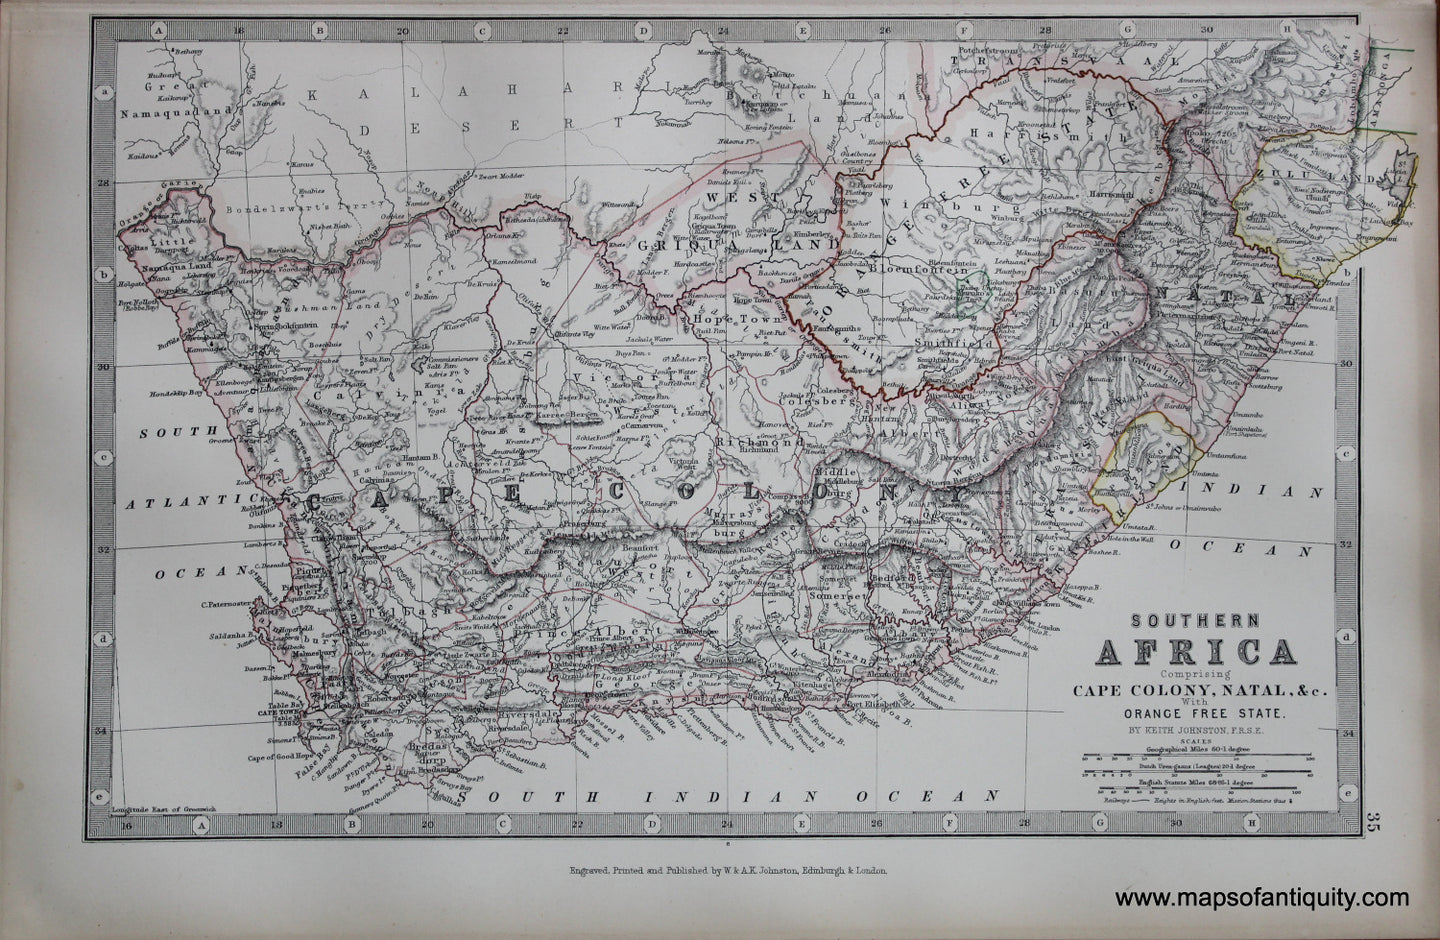 Antique-printed-color-Map-Southern-Africa-Comprising-Cape-Colony-Natal-&c.-With-Orange-Free-State-Africa-South-Africa-1881-Johnston-Maps-Of-Antiquity